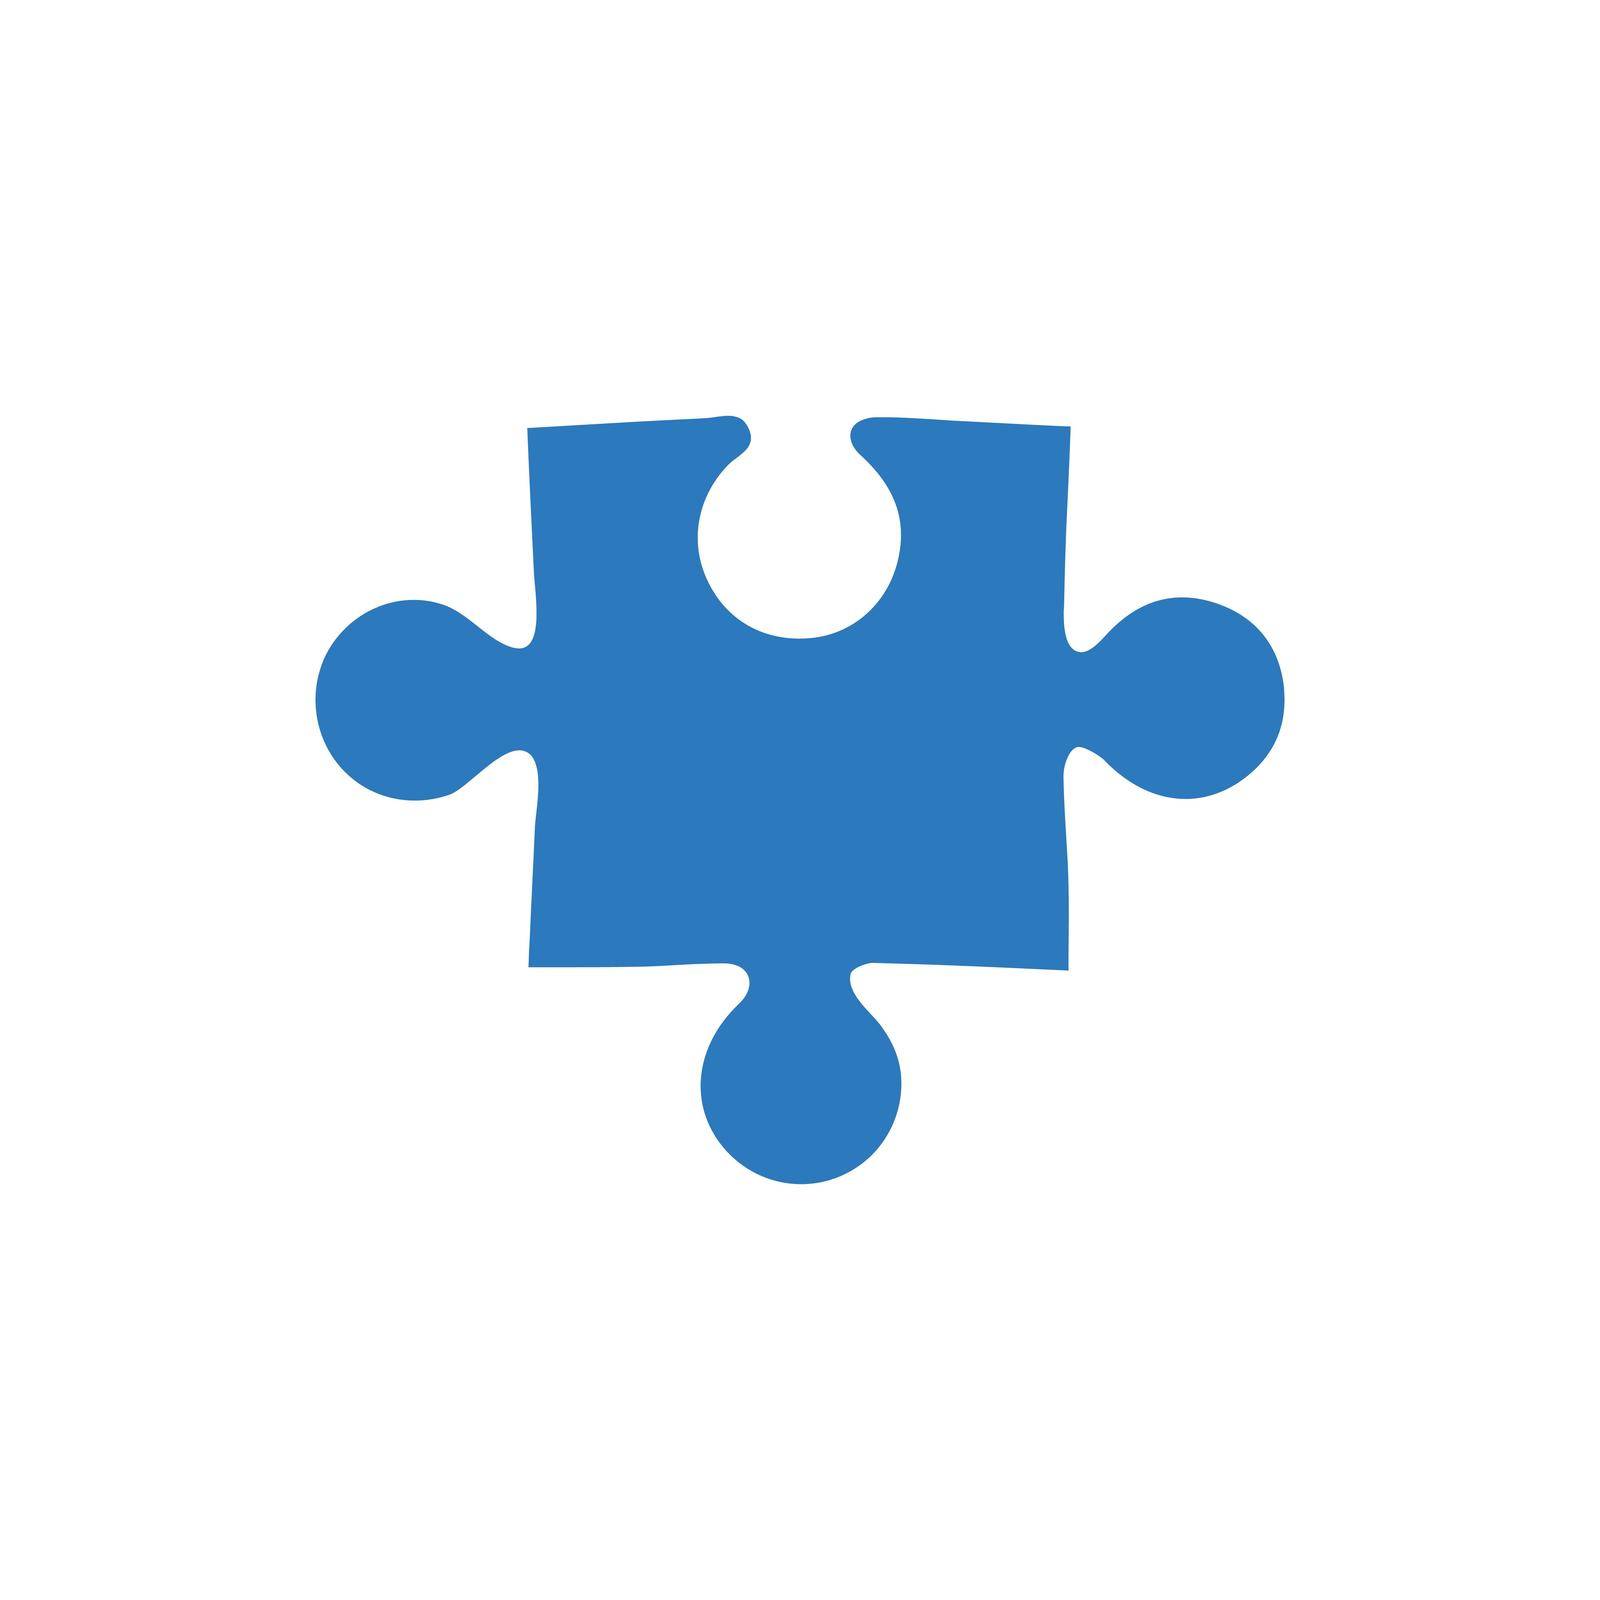 Puzzle, Solution icon. Meticulously designed vector EPS file.